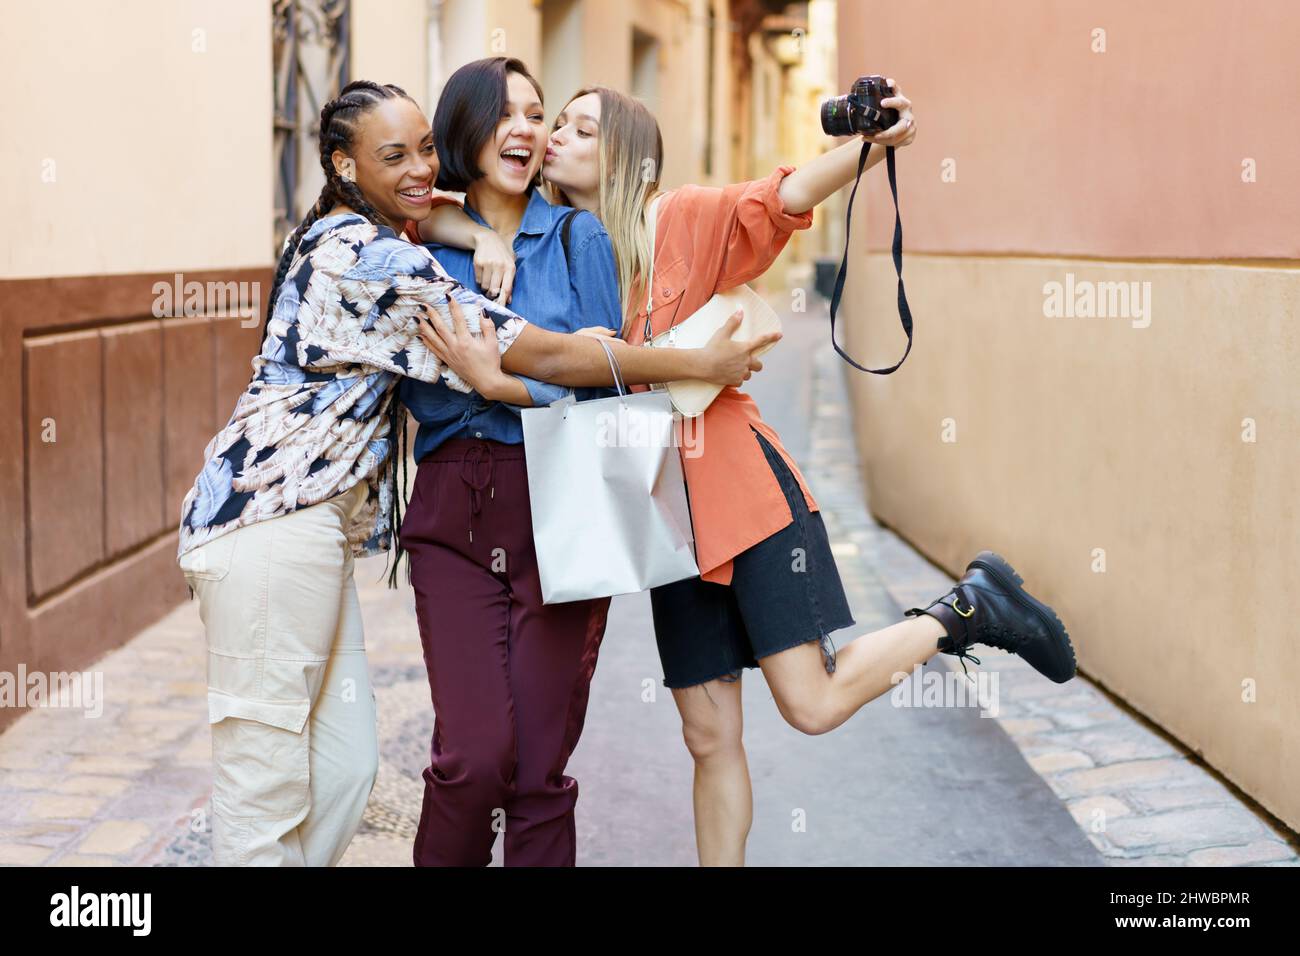 Joyful young diverse women embracing and taking selfie on camera in city Stock Photo